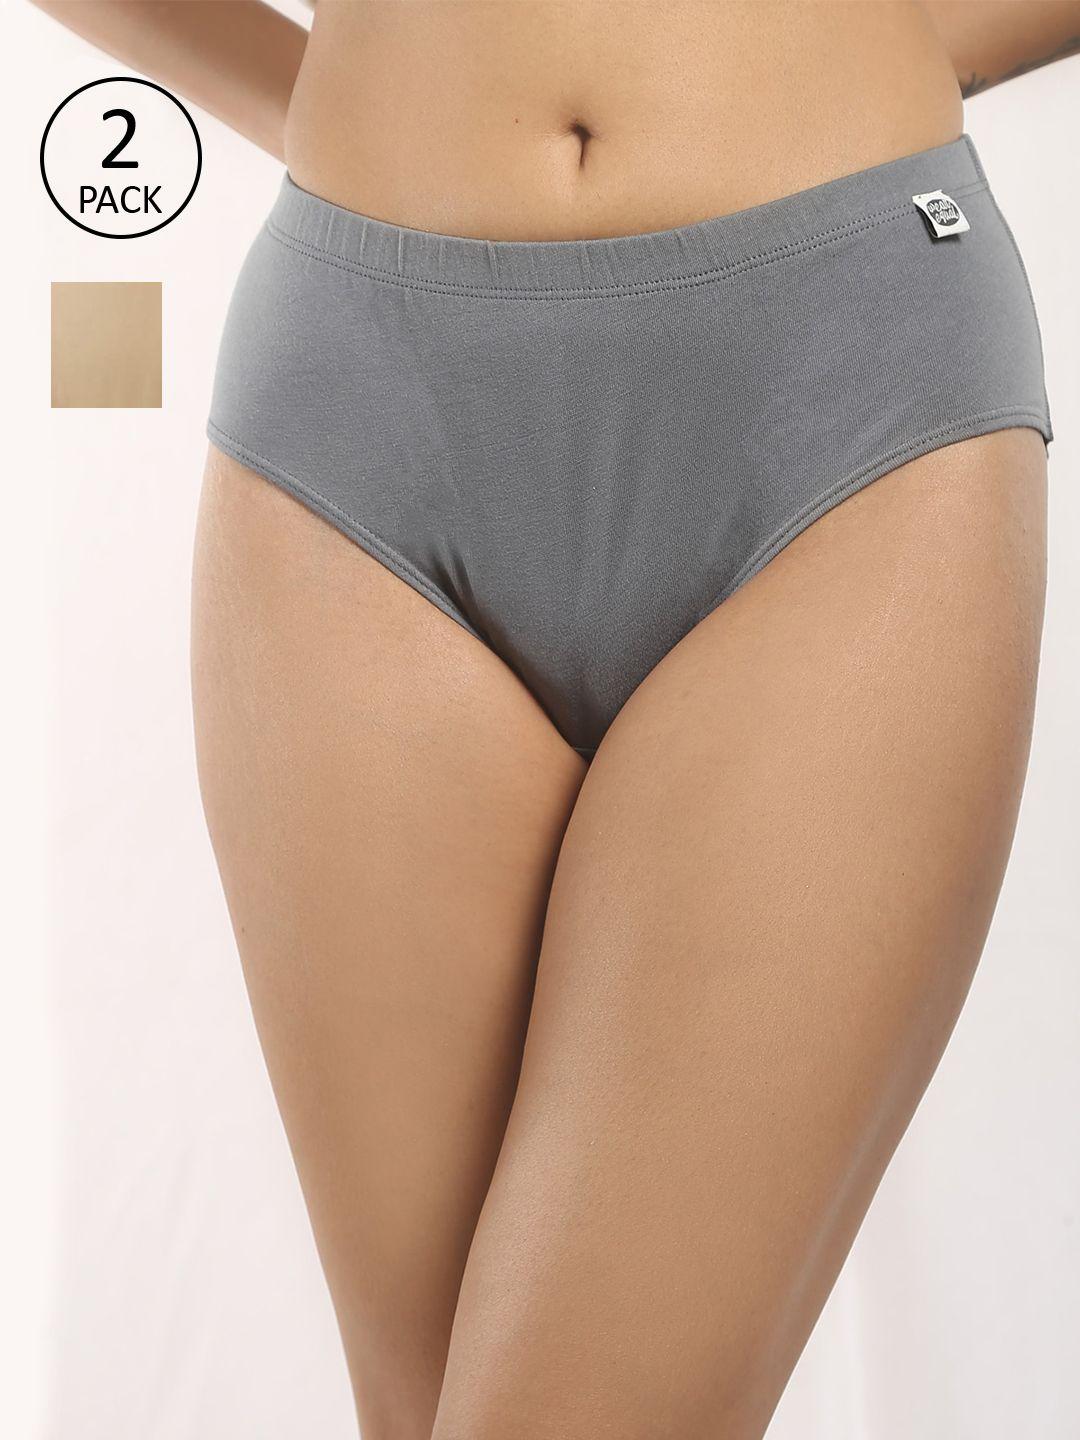 wear-equal-women-pack-of-2-printed-hipster-briefs-003/ba/grey-nude/pp